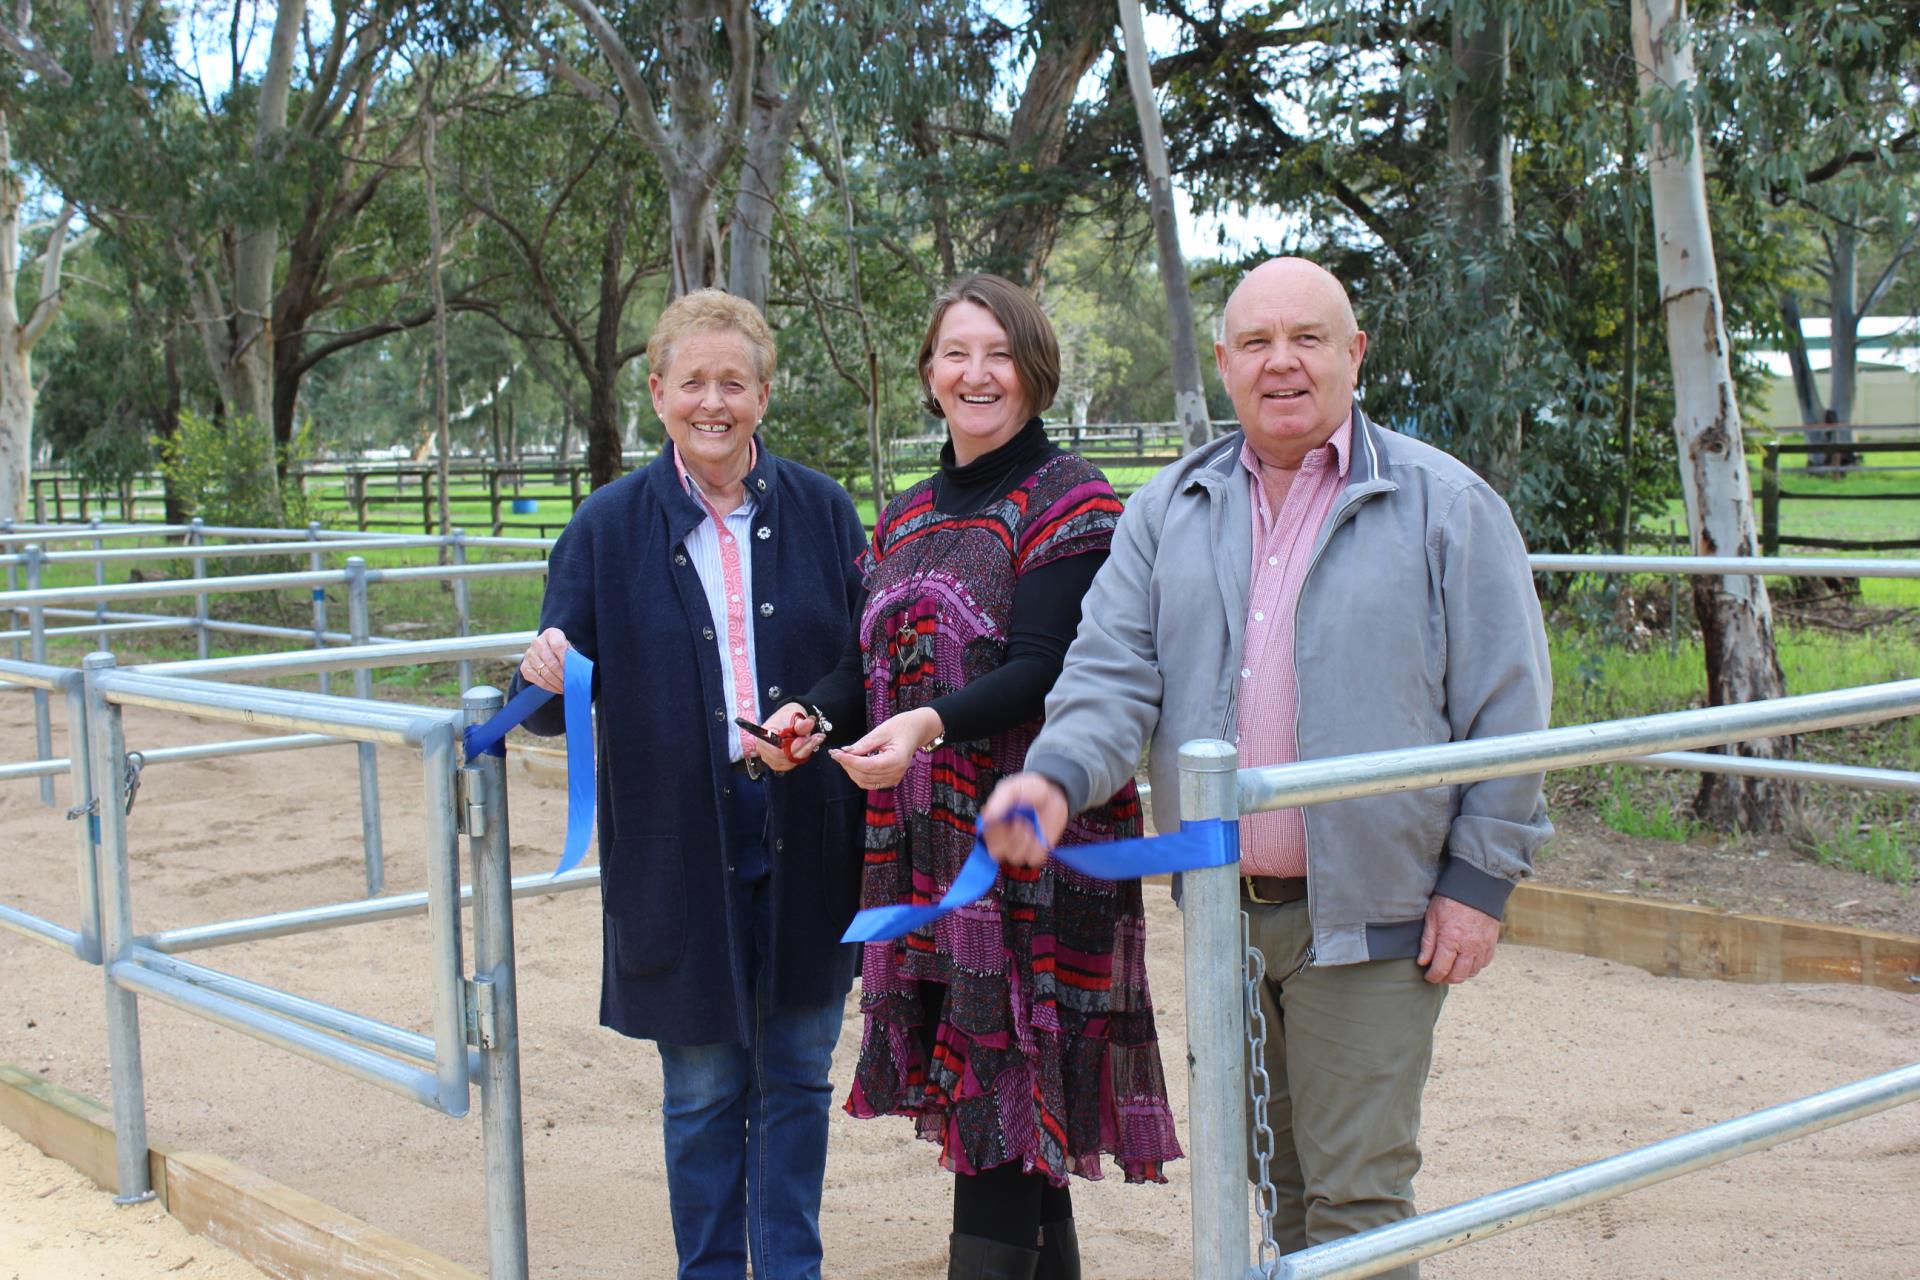 Day yards officially opened at Darling Downs Equestrian Park